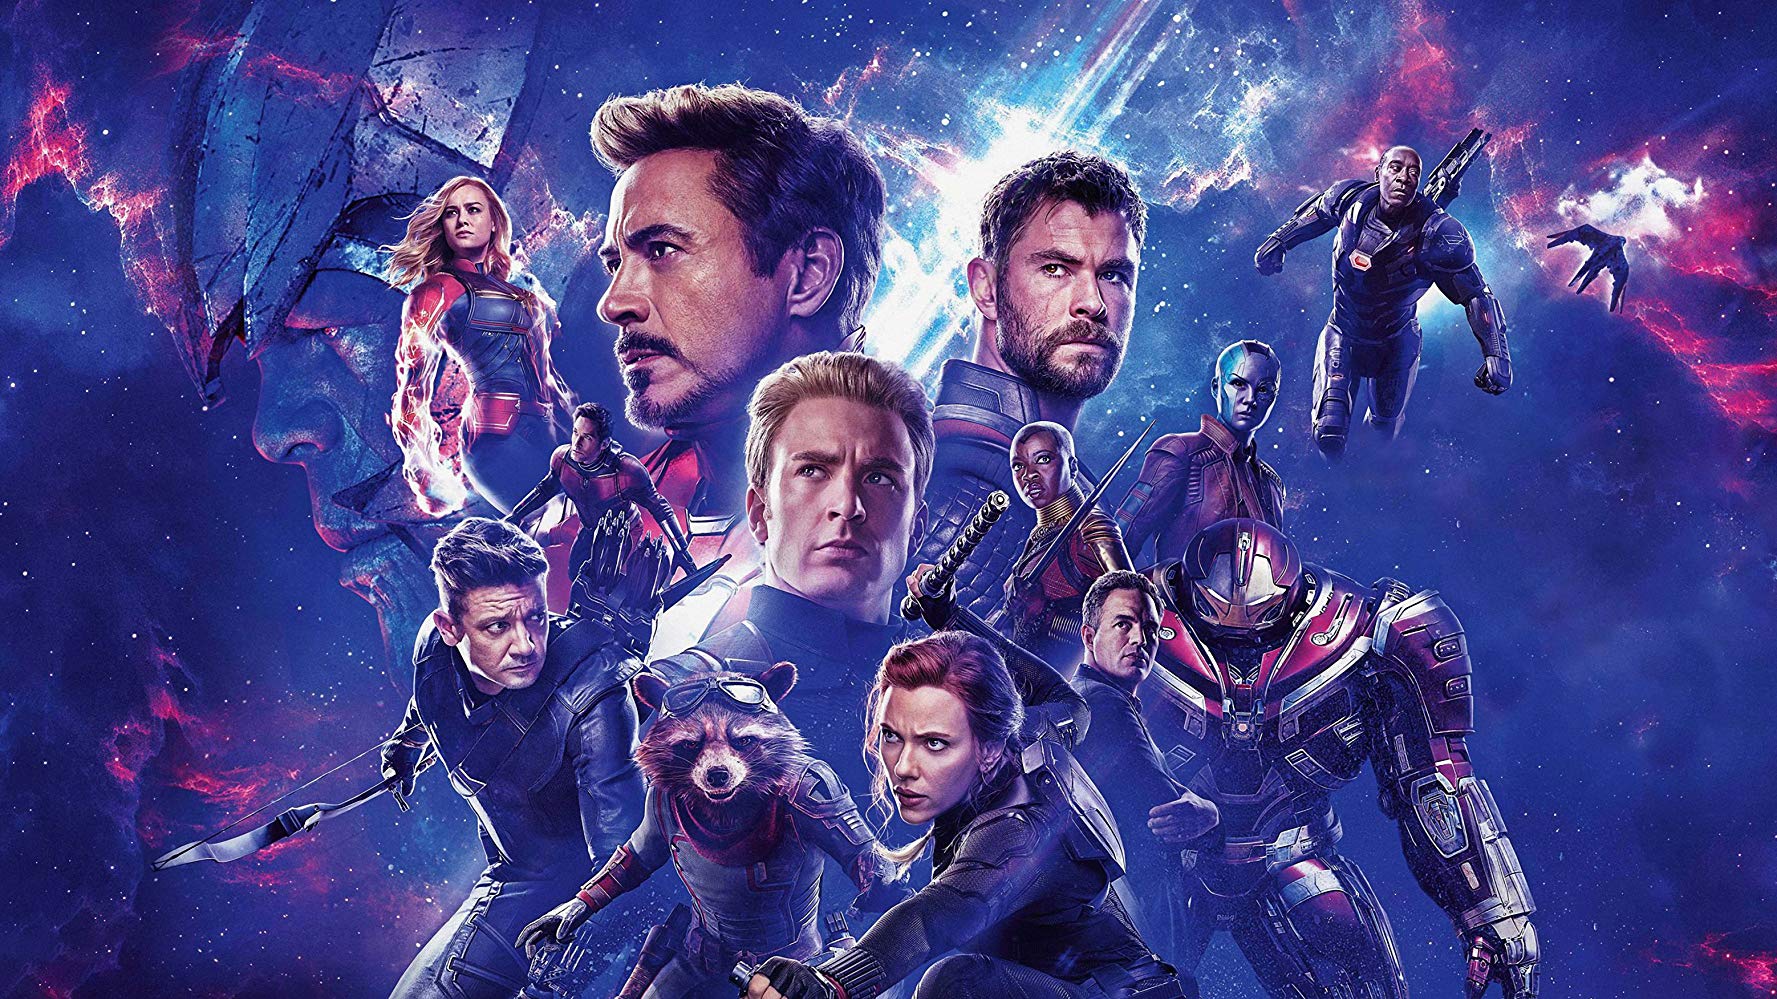 Avengers End game